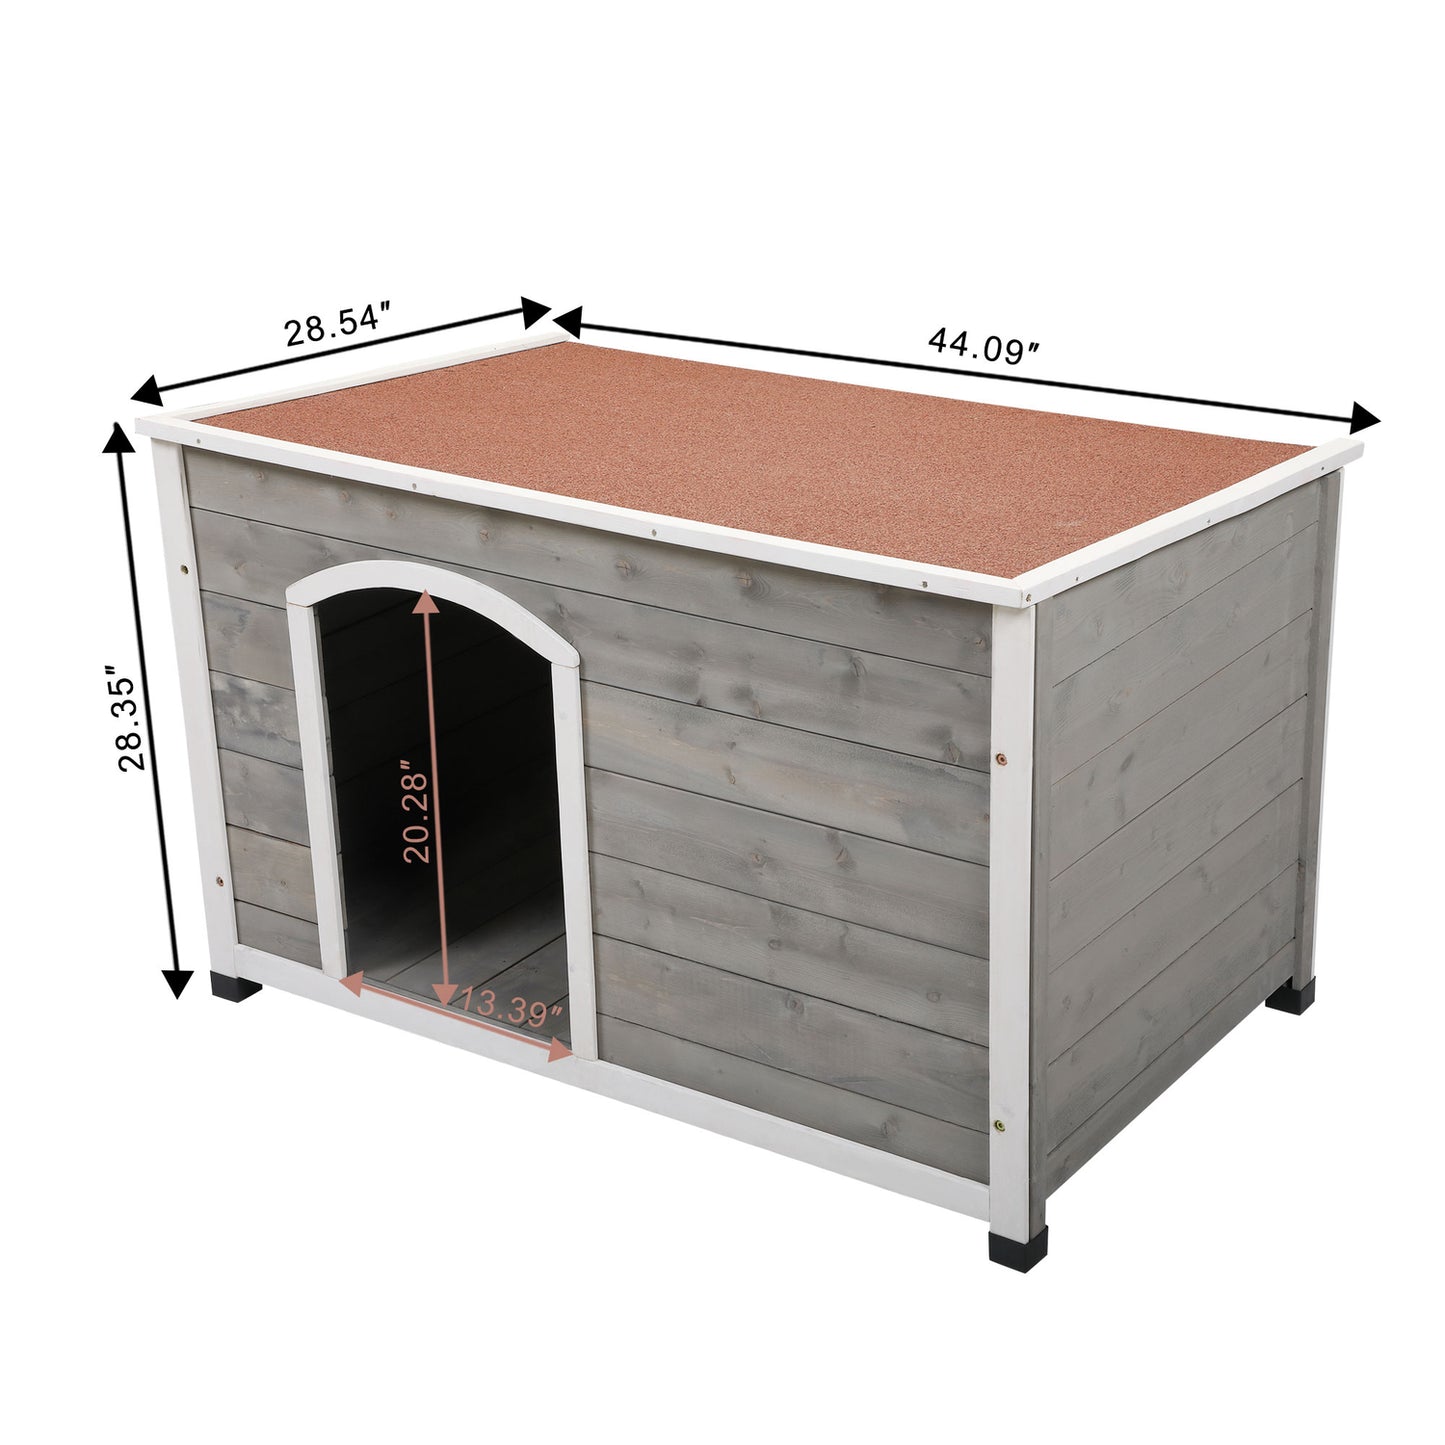 Atotoa Wooden Dog House Outdoor & Indoor Large Pet Shelter Pet House Home Extreme Weather Resistant Wood Log Cabin Dog House